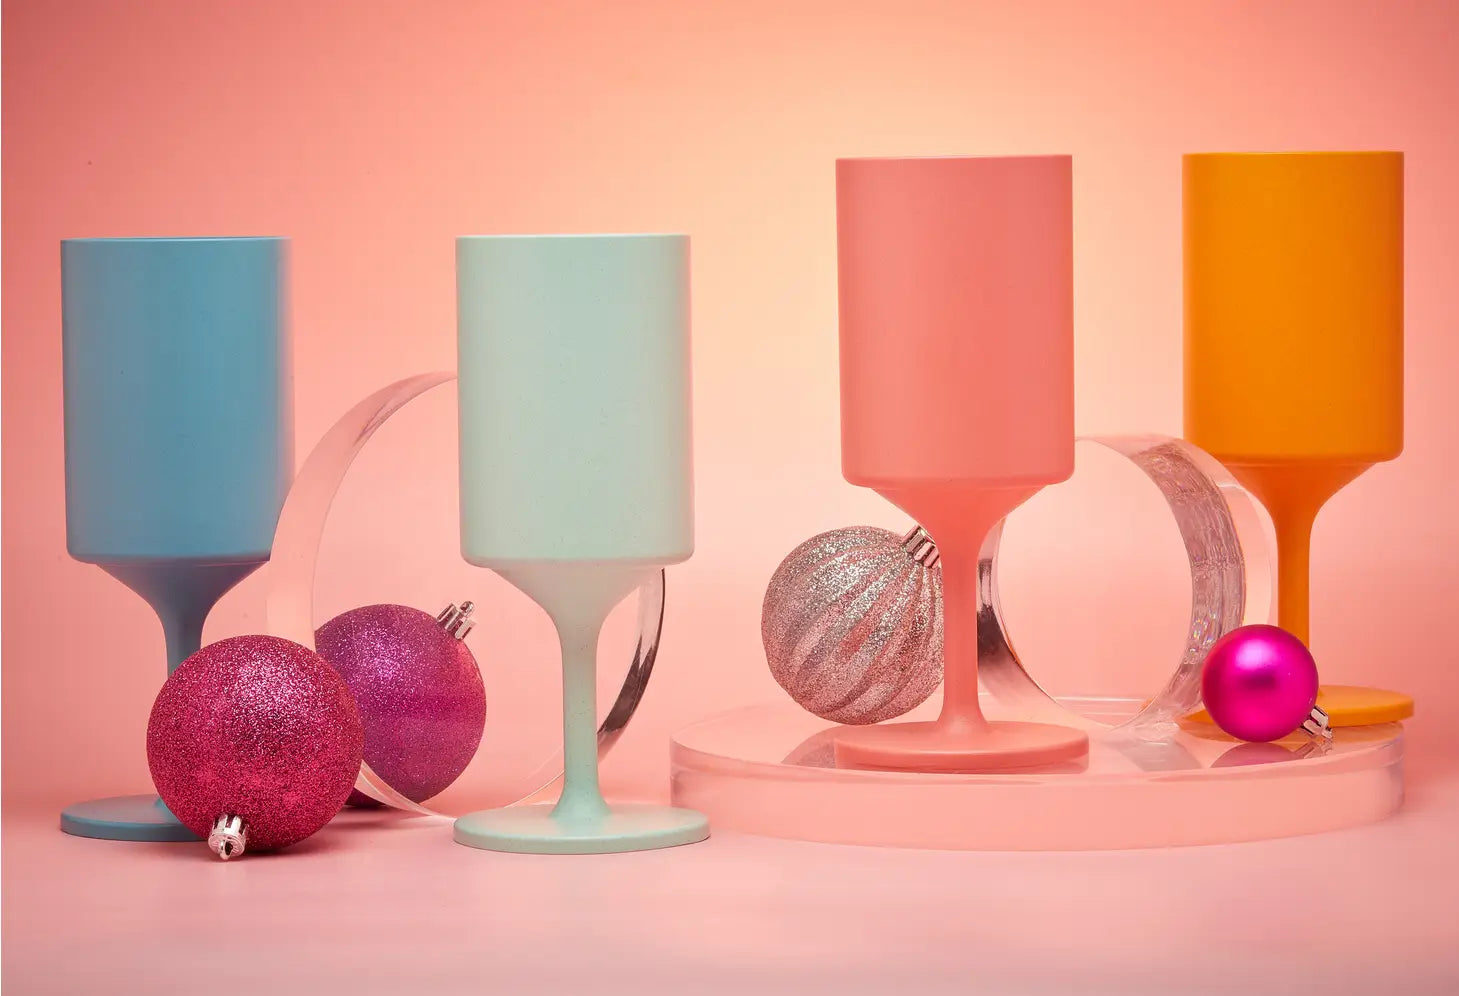 Fully compostable and reusable party cups or wine glasses in orange, coral, aqua and teal 